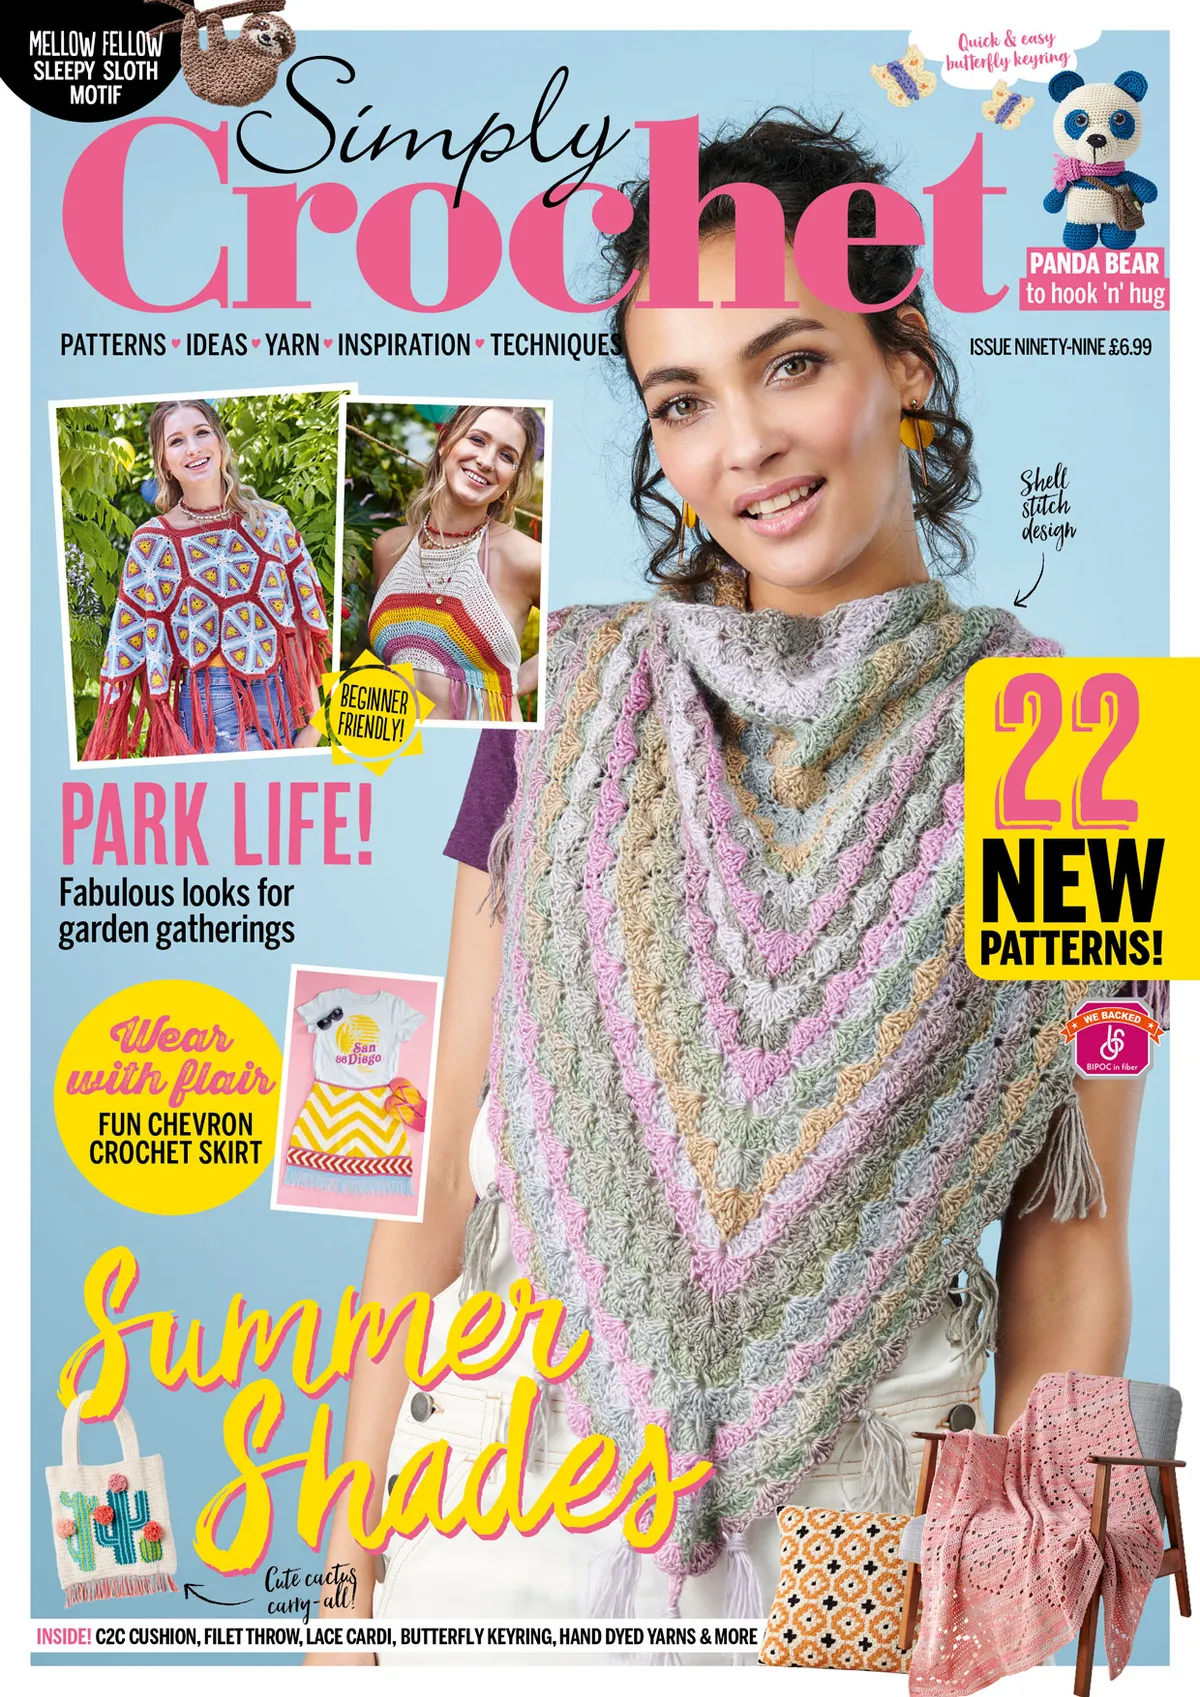 Simply_Crochet_issue_99